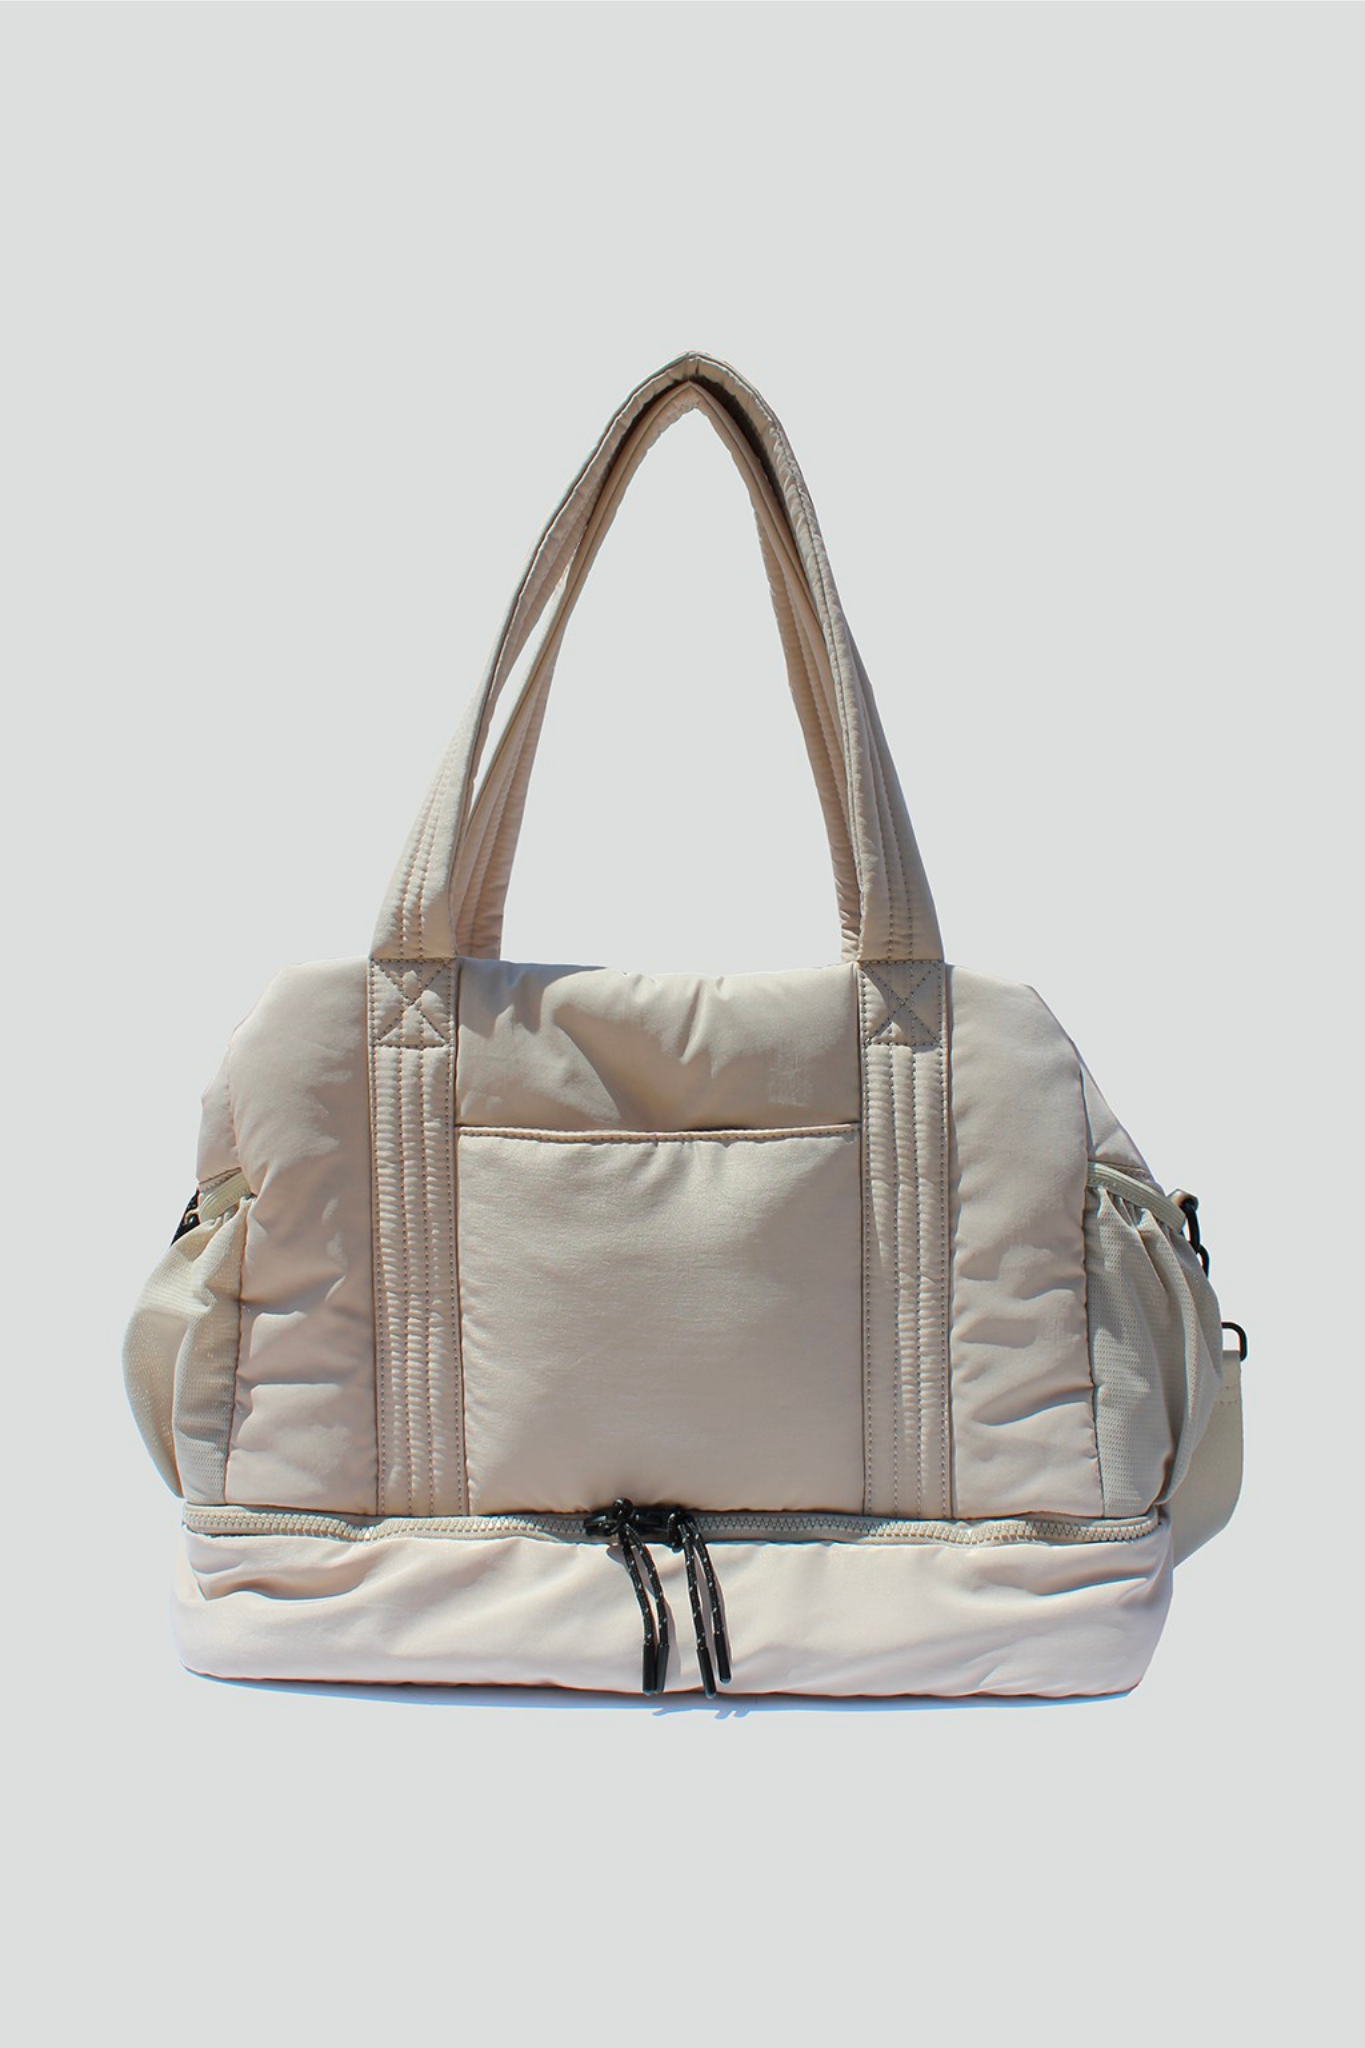 View 1 of Brooke Puffy Duffle Bag in Ivory, a Bags from Larrea Cove. Detail: 
Introducing Brooke – t...